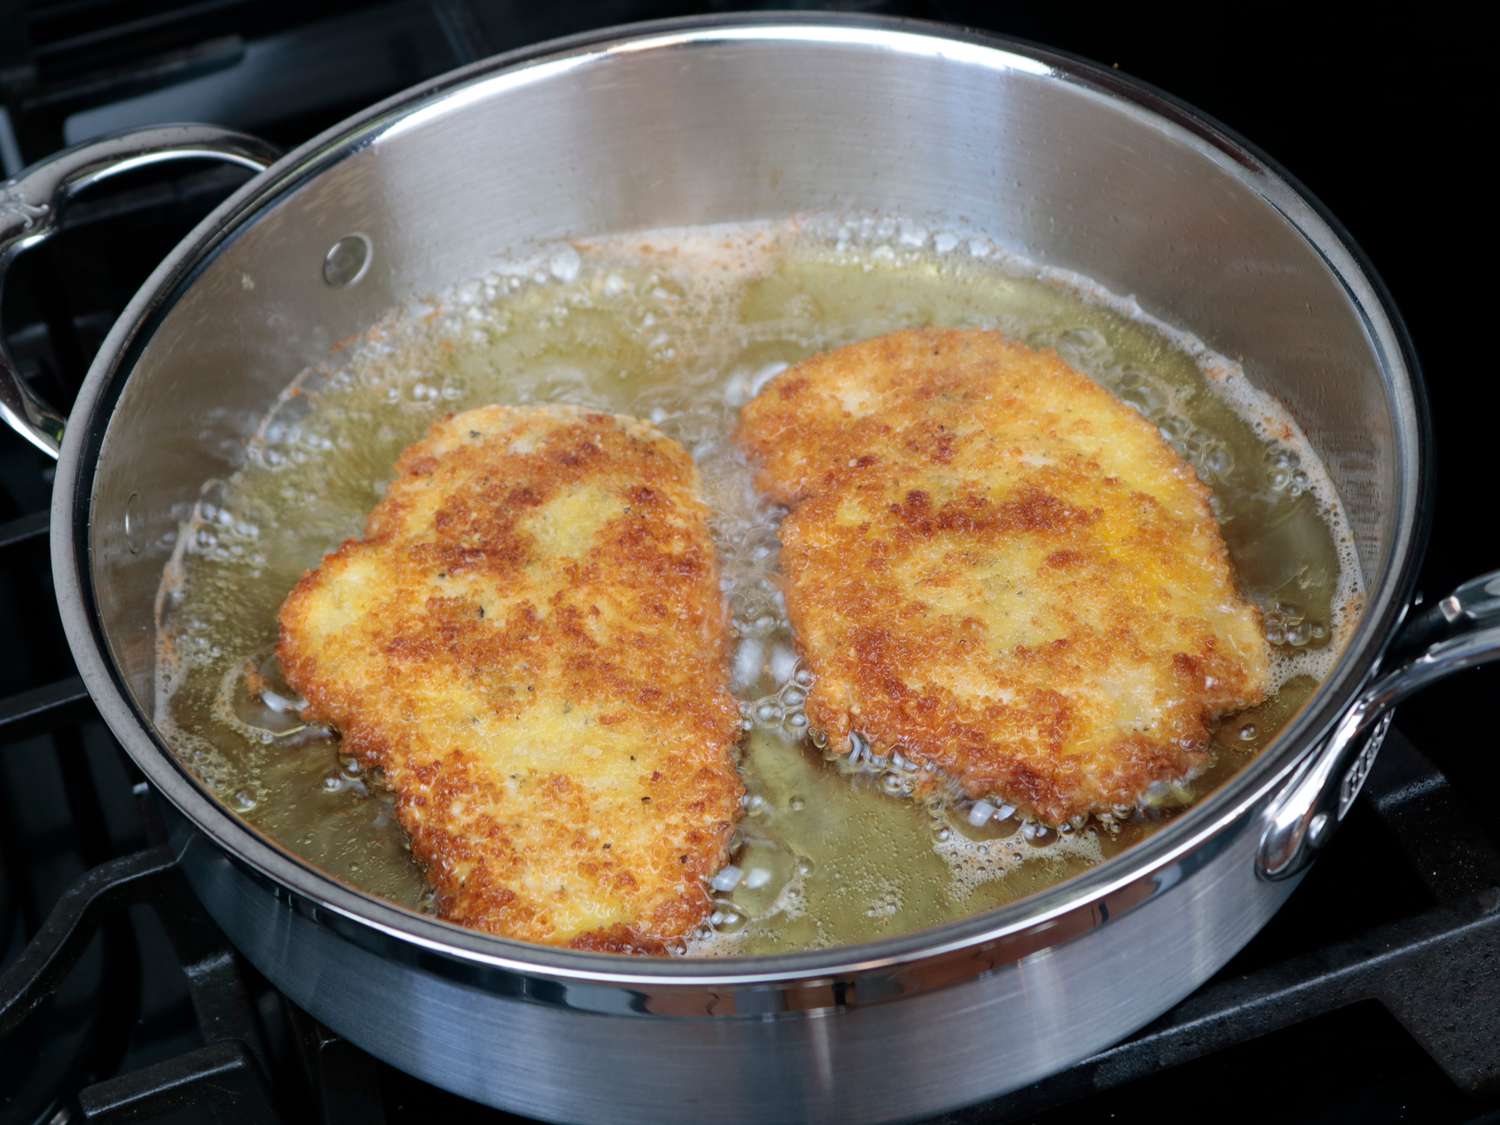 two chicken cutlets frying in oil with a browned side facing up